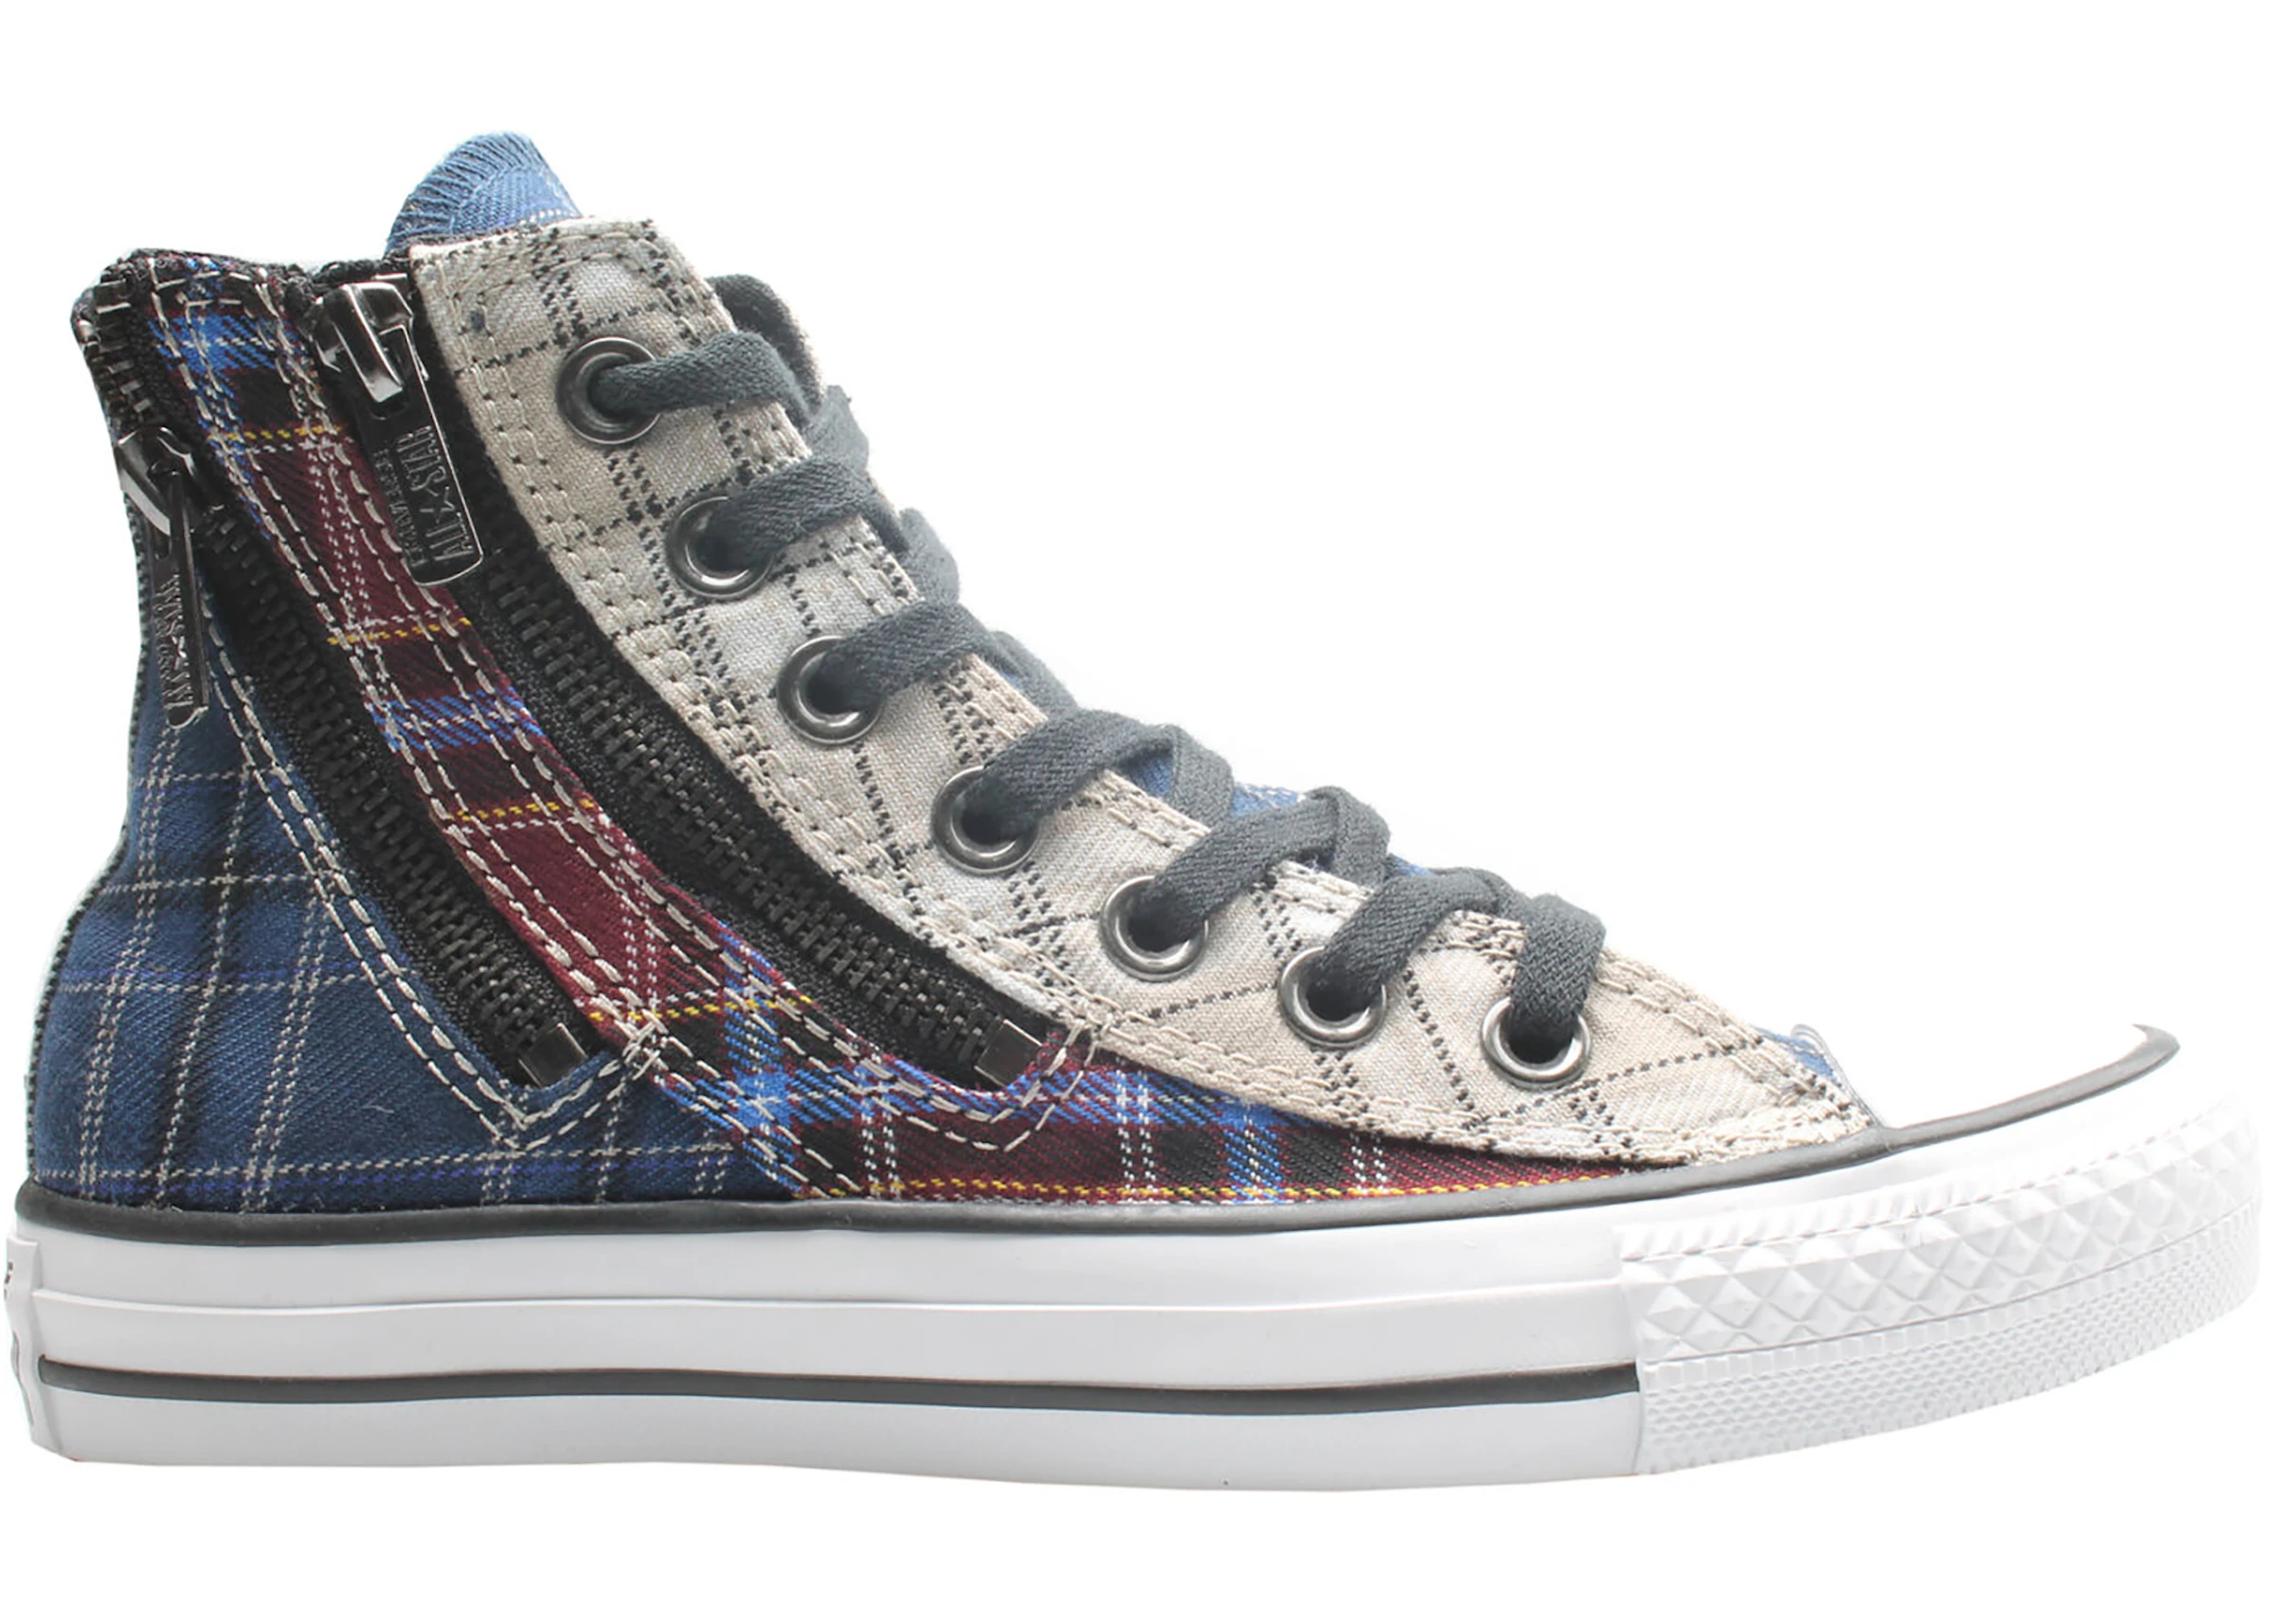 Converse Chuck Taylor All-Star Double Zip Hi Red Blue Plaid (Women's) -  549575C - US